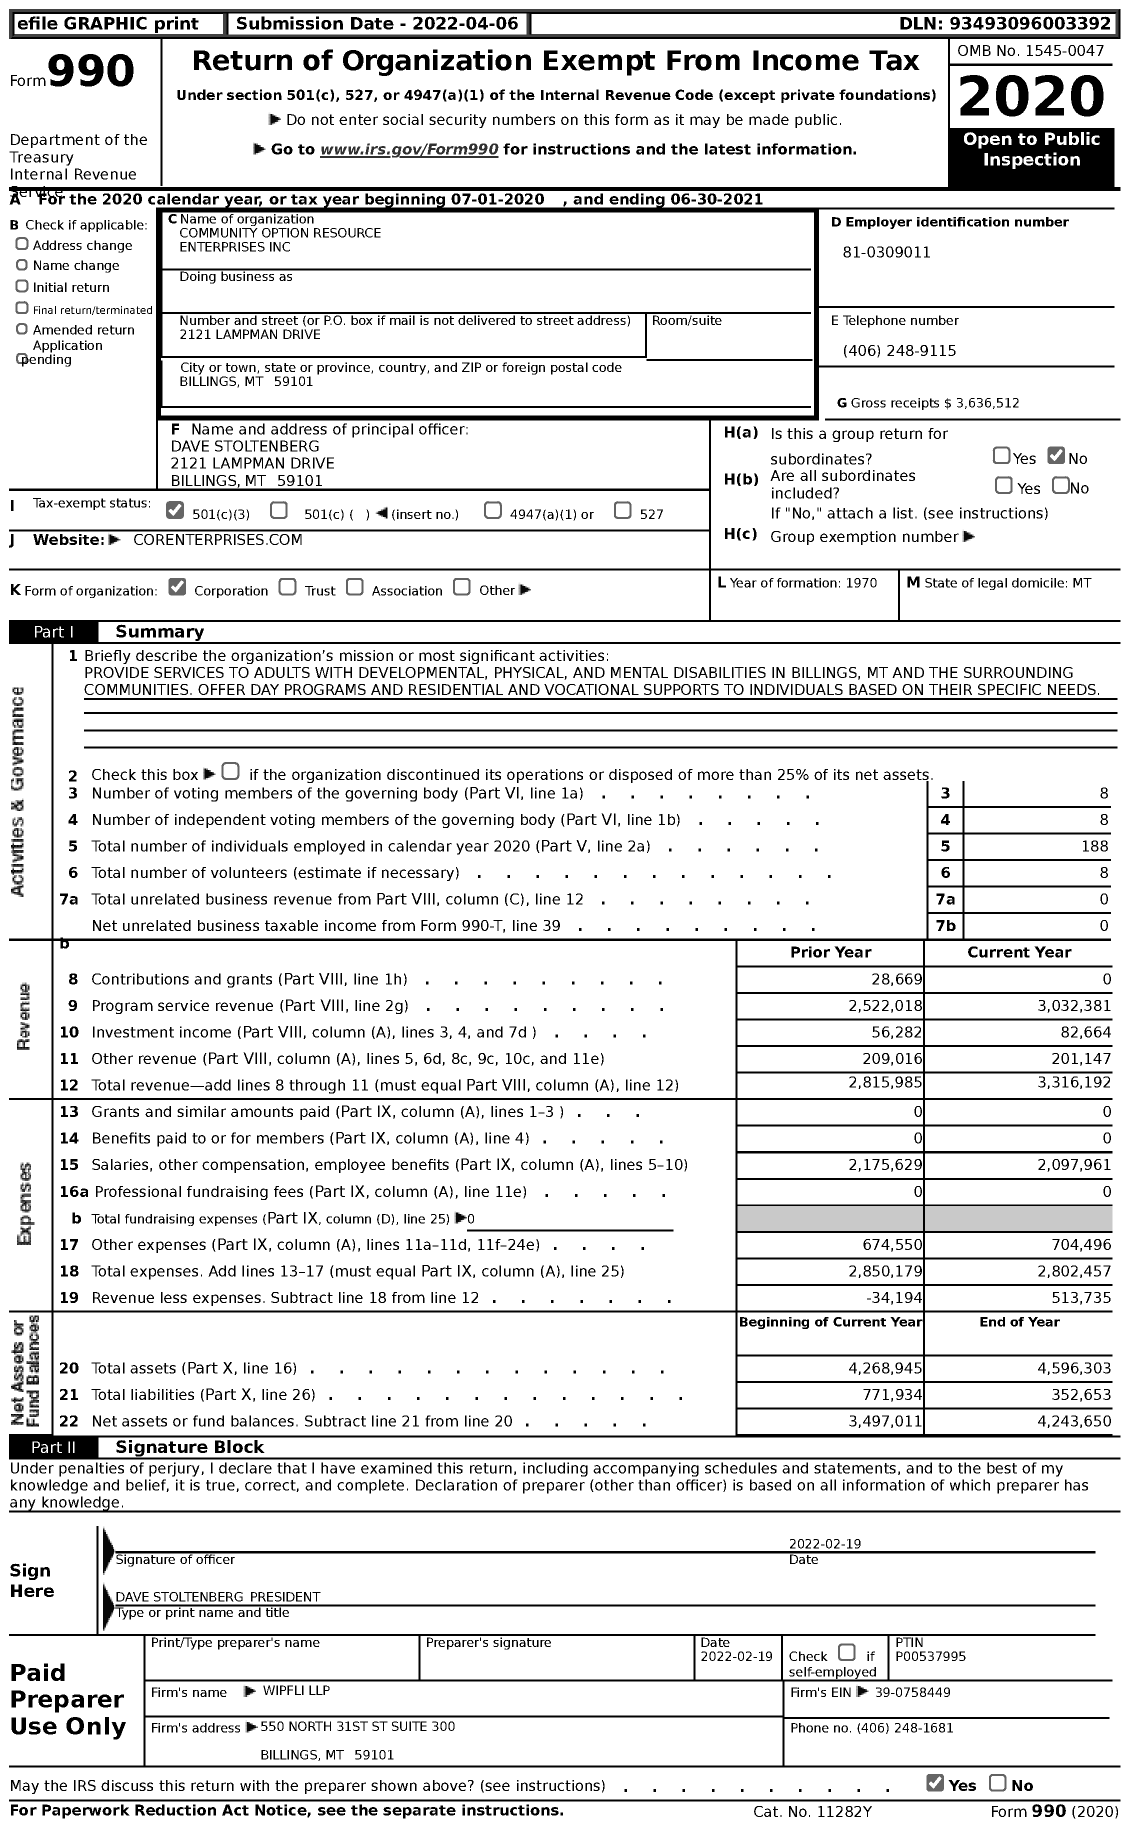 Image of first page of 2020 Form 990 for Community Option Resource Enterprises